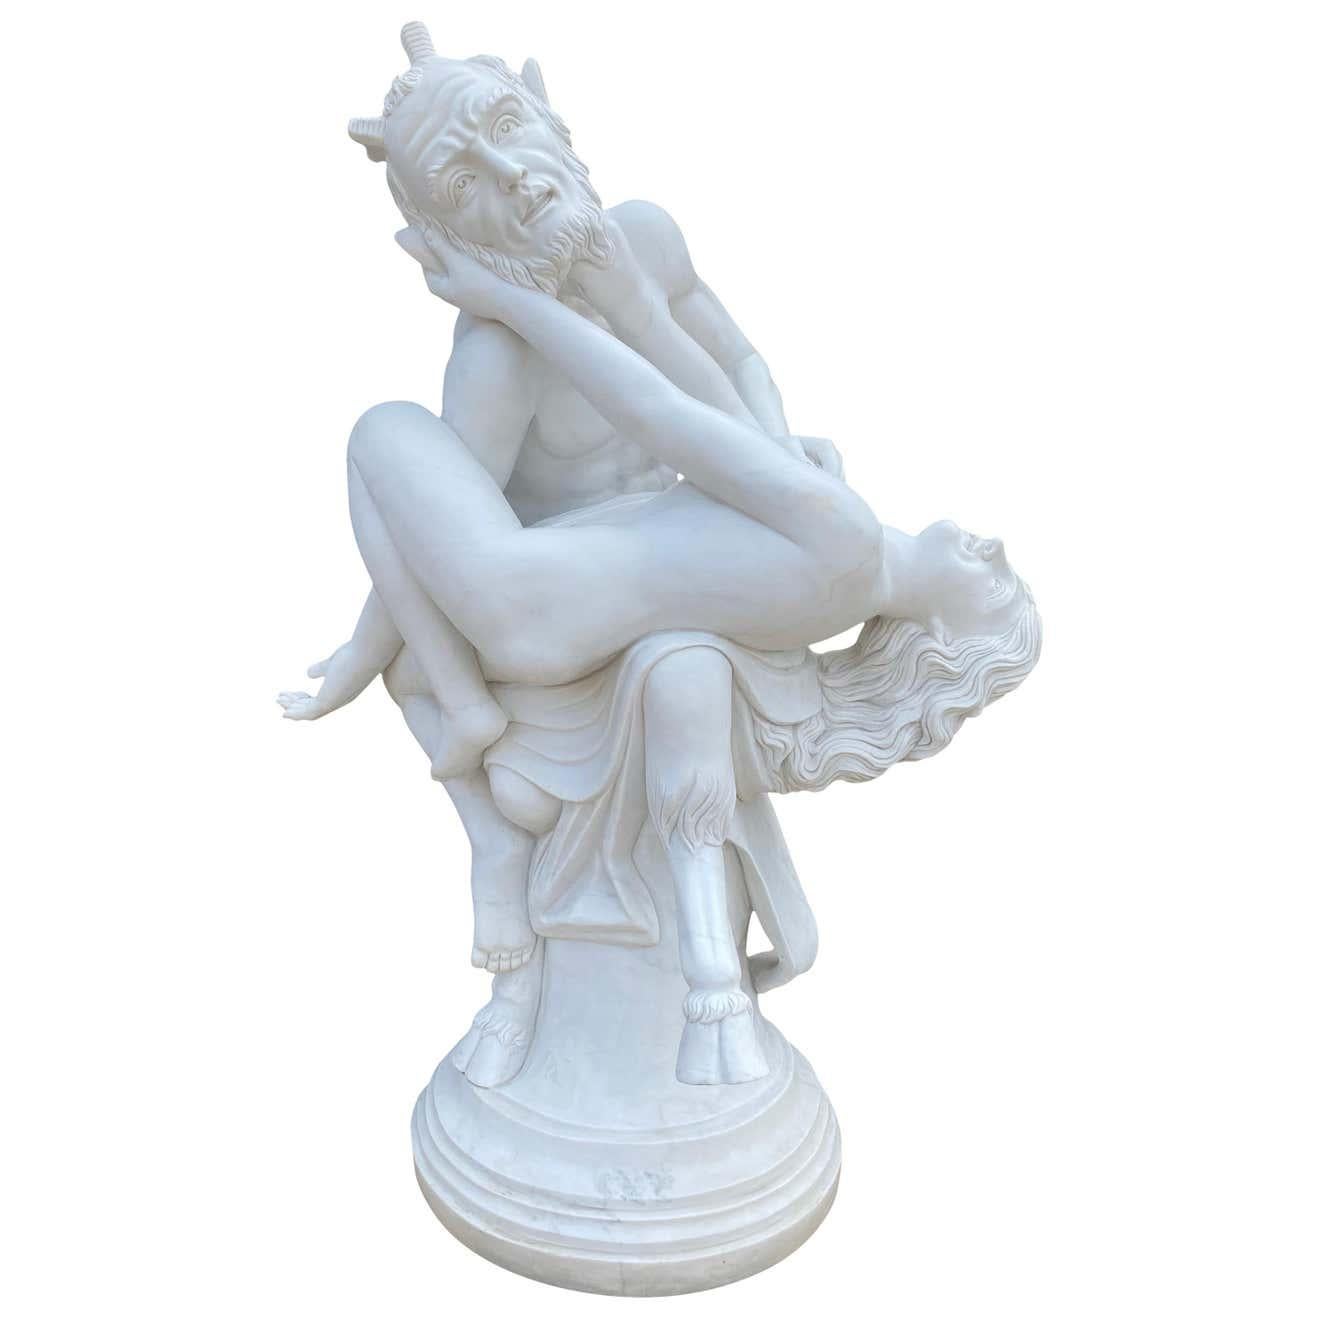 A beautiful 20th century life-sized sculpture of Pan The Ancient Greek God of Sexuality. In ancient Greek religion and mythology, Pan is the god of the wild, shepherds and flocks, nature of mountain wilds, rustic music and impromptus, and companion